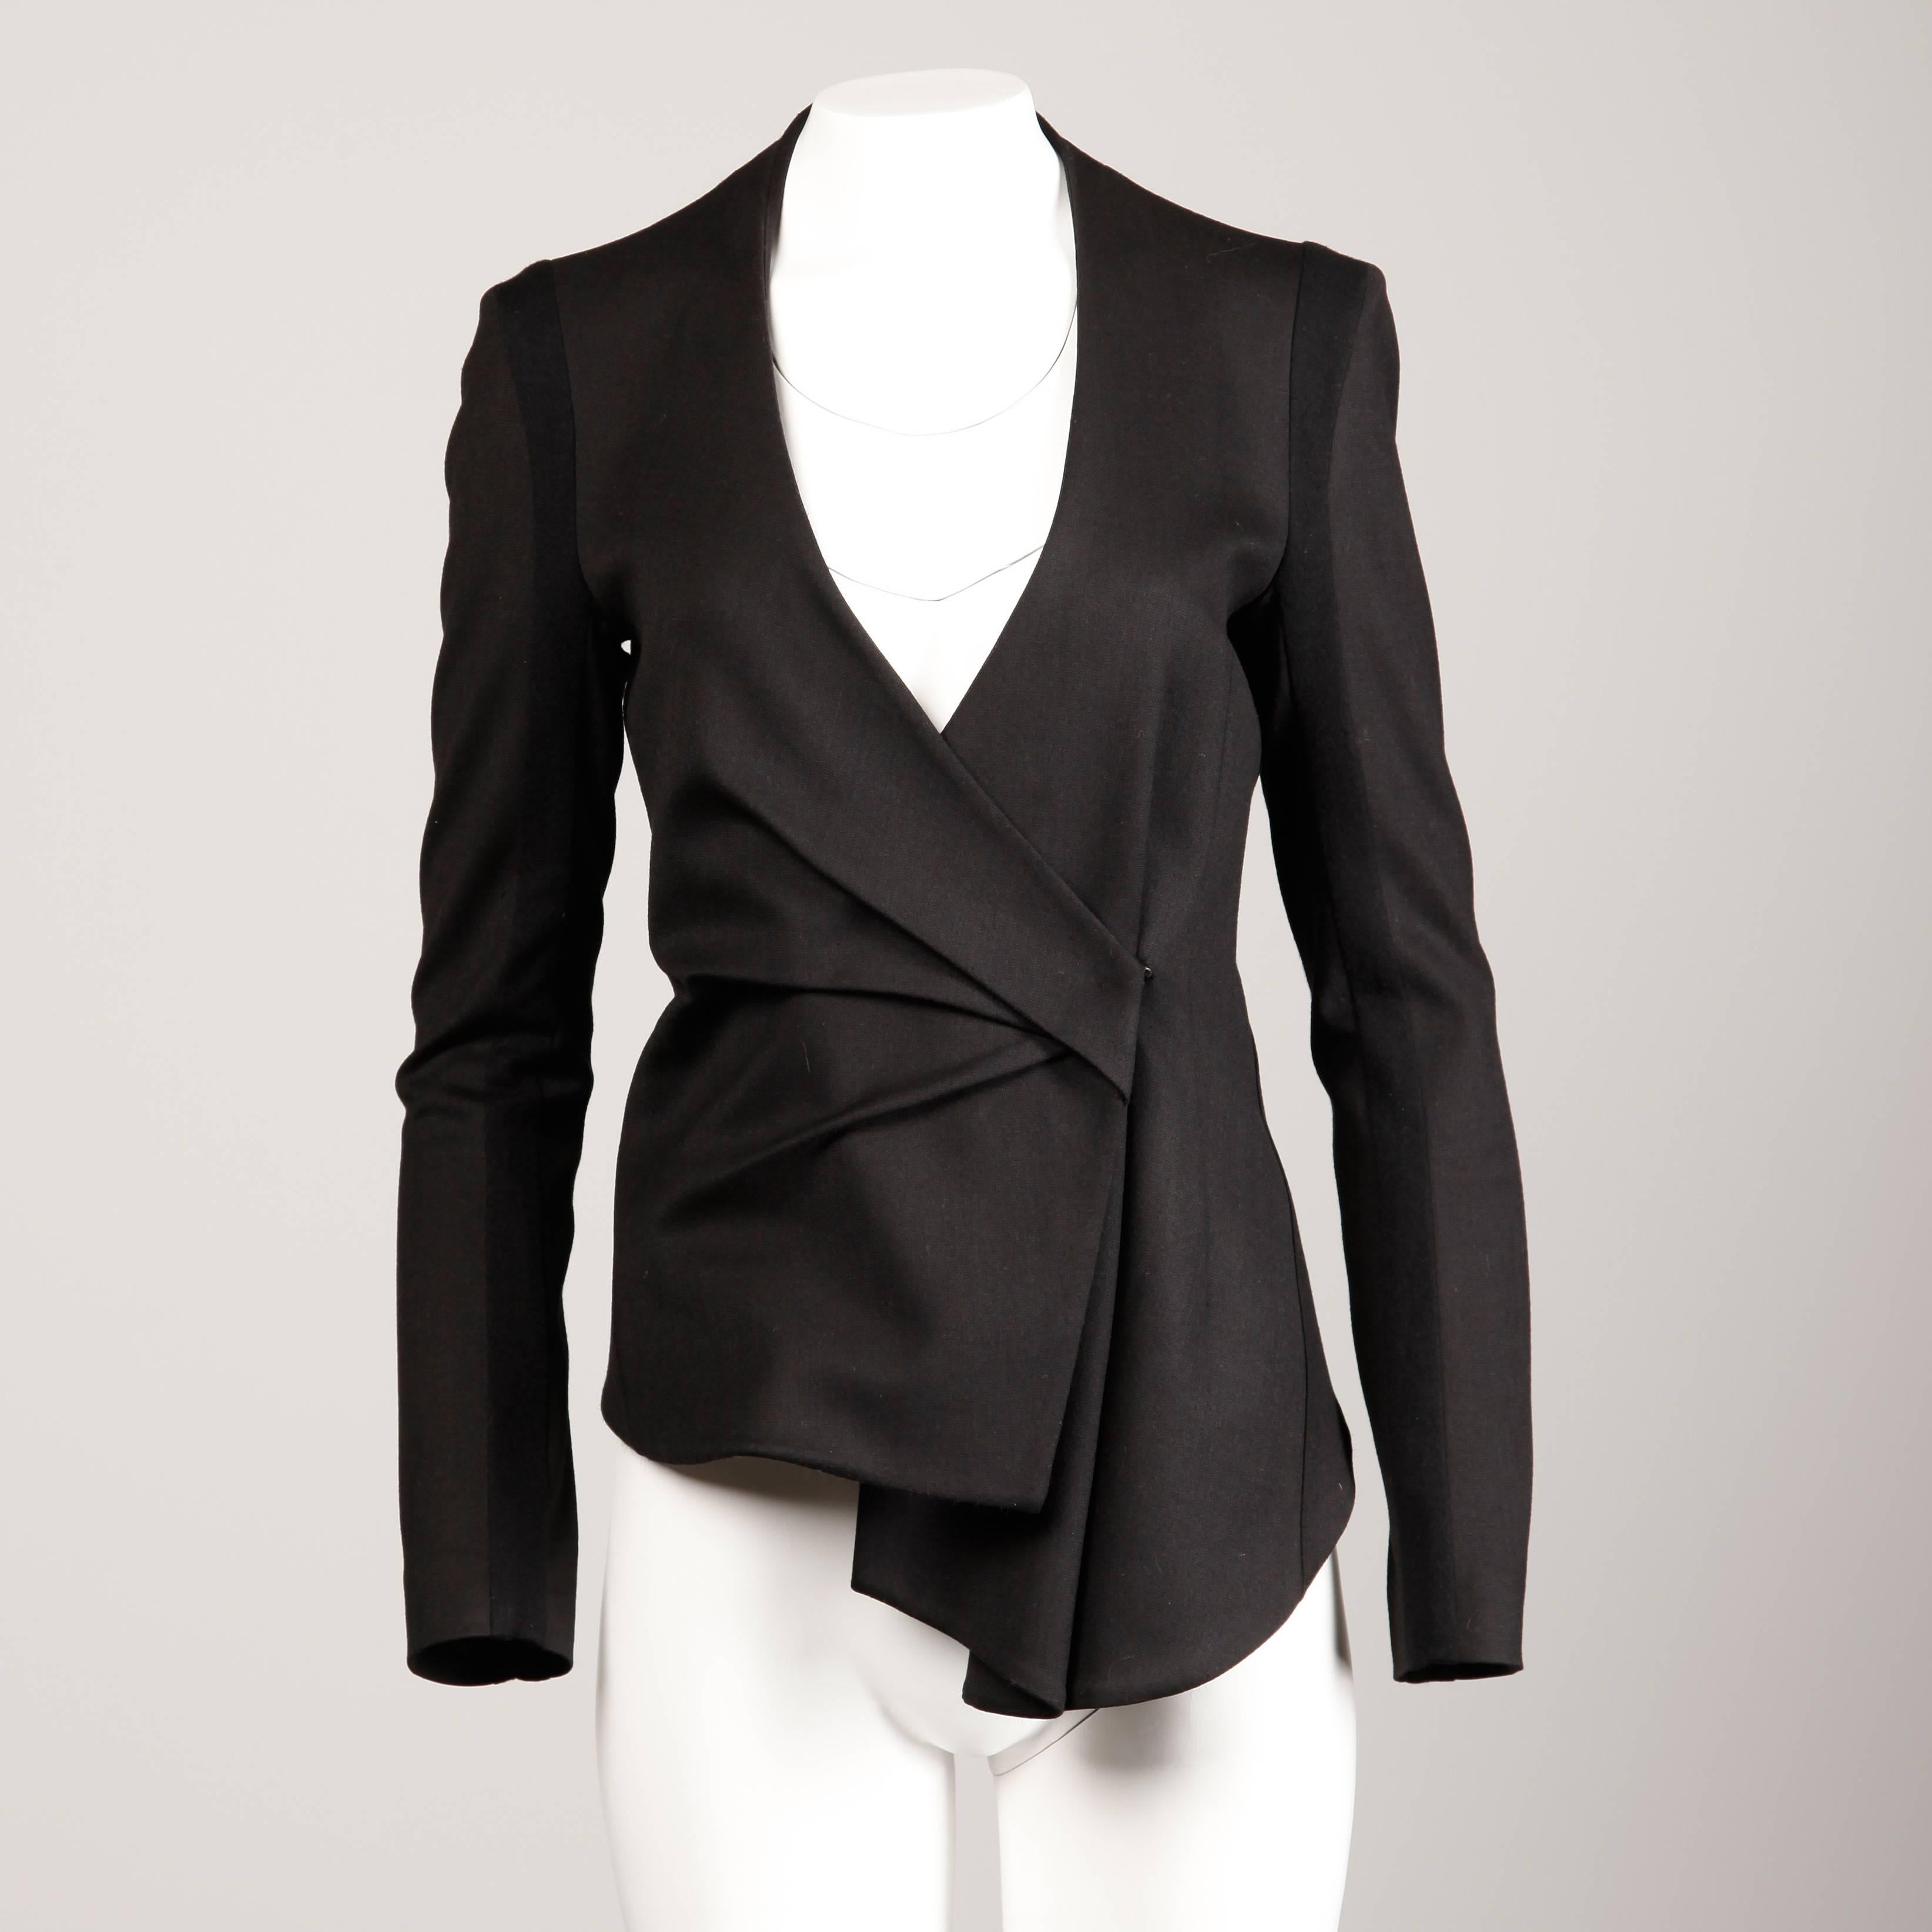 Chic black wool asymmetric blazer jacket by Helmut Lang with bold shoulders and hook closure. Fully lined in 95% silk 5% spandex fabric. The fabric content is 97% wool 3% lycra. The marked size is 2 and the jacket fits true to size. The bust